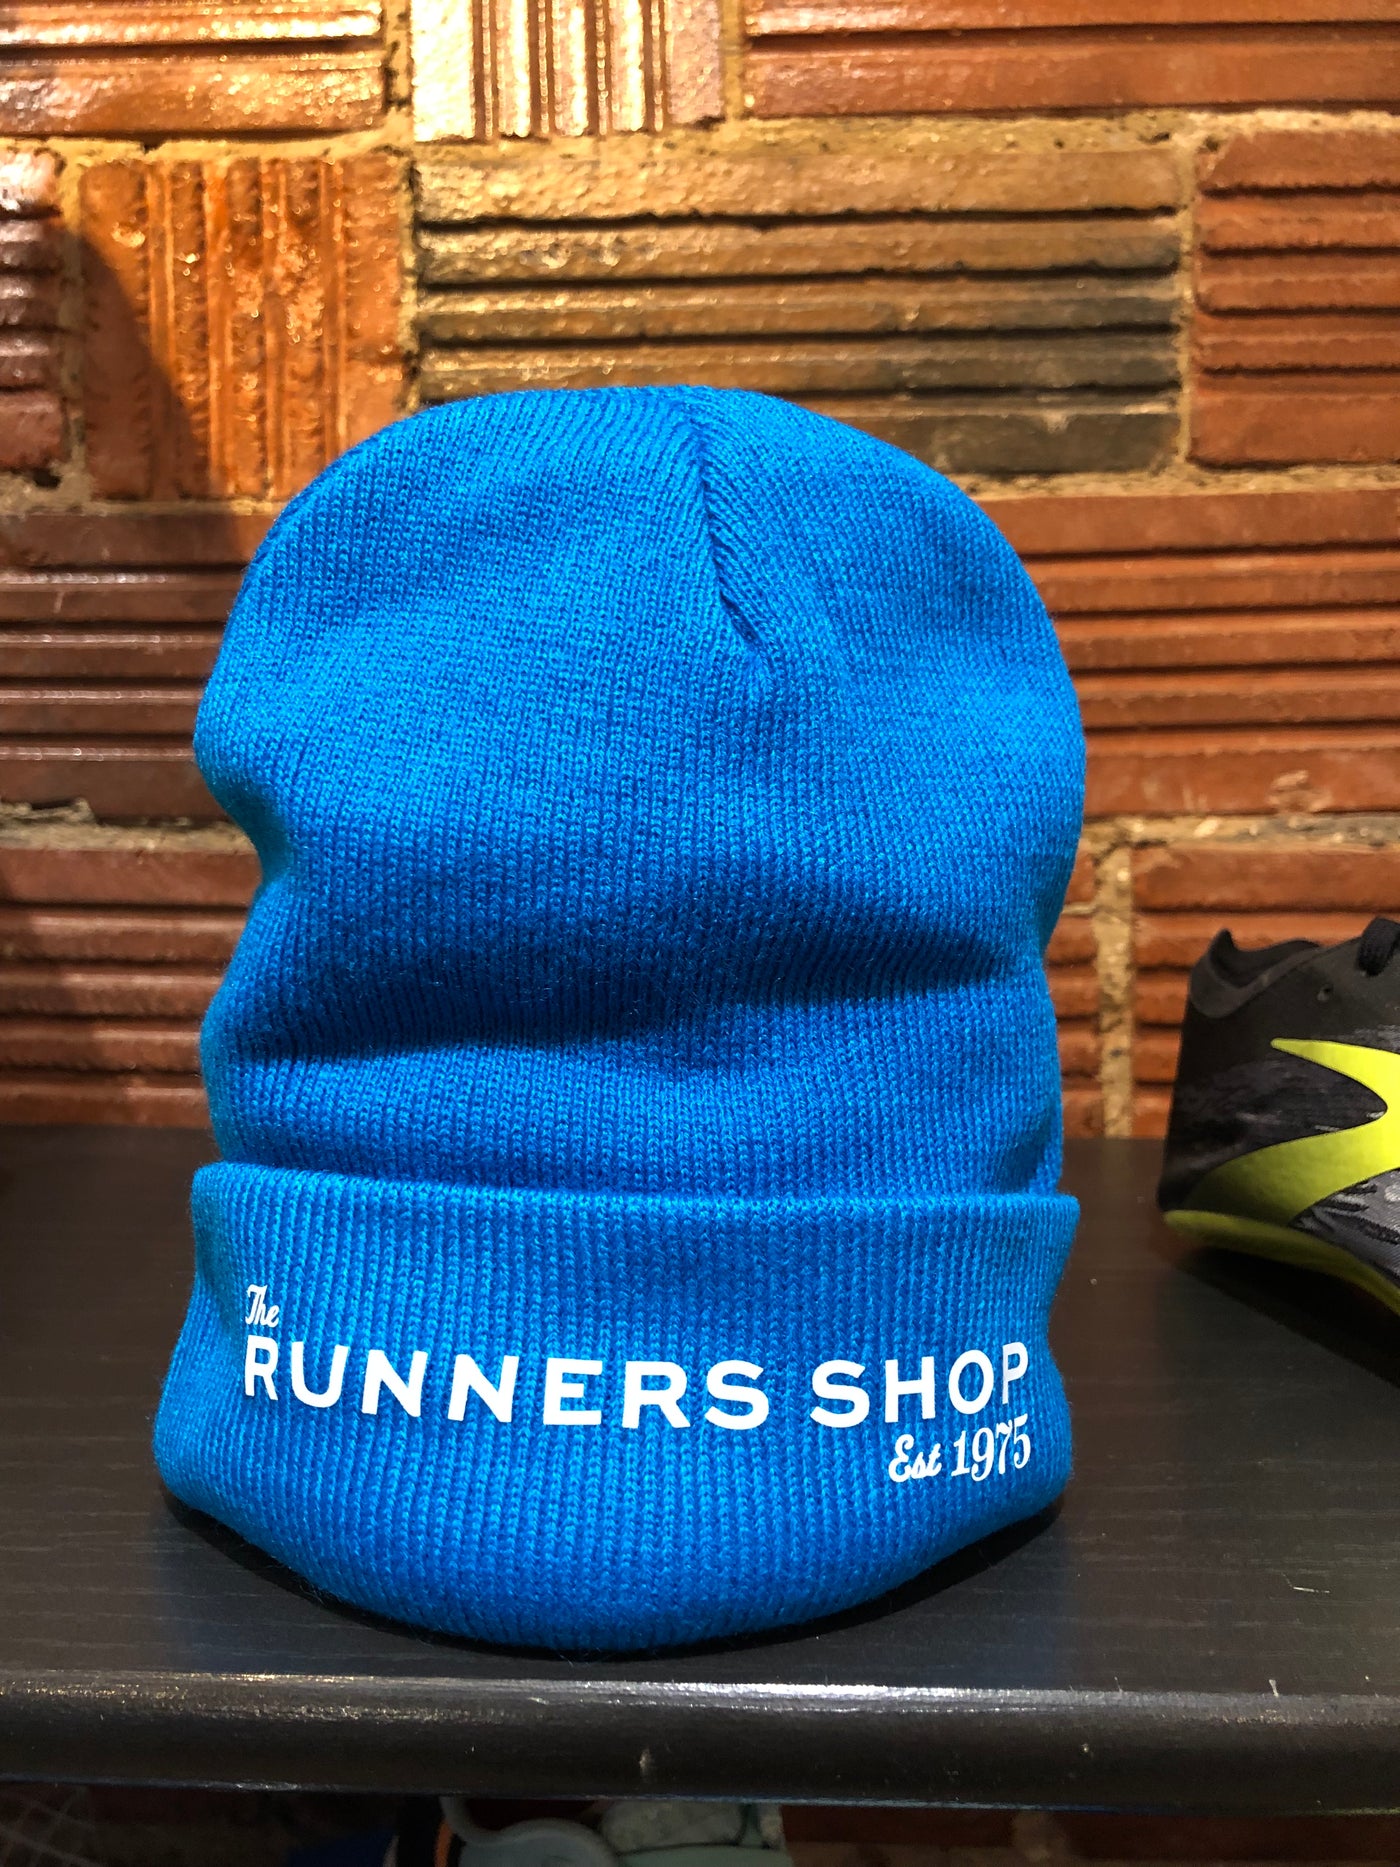 The Runners Shop touque